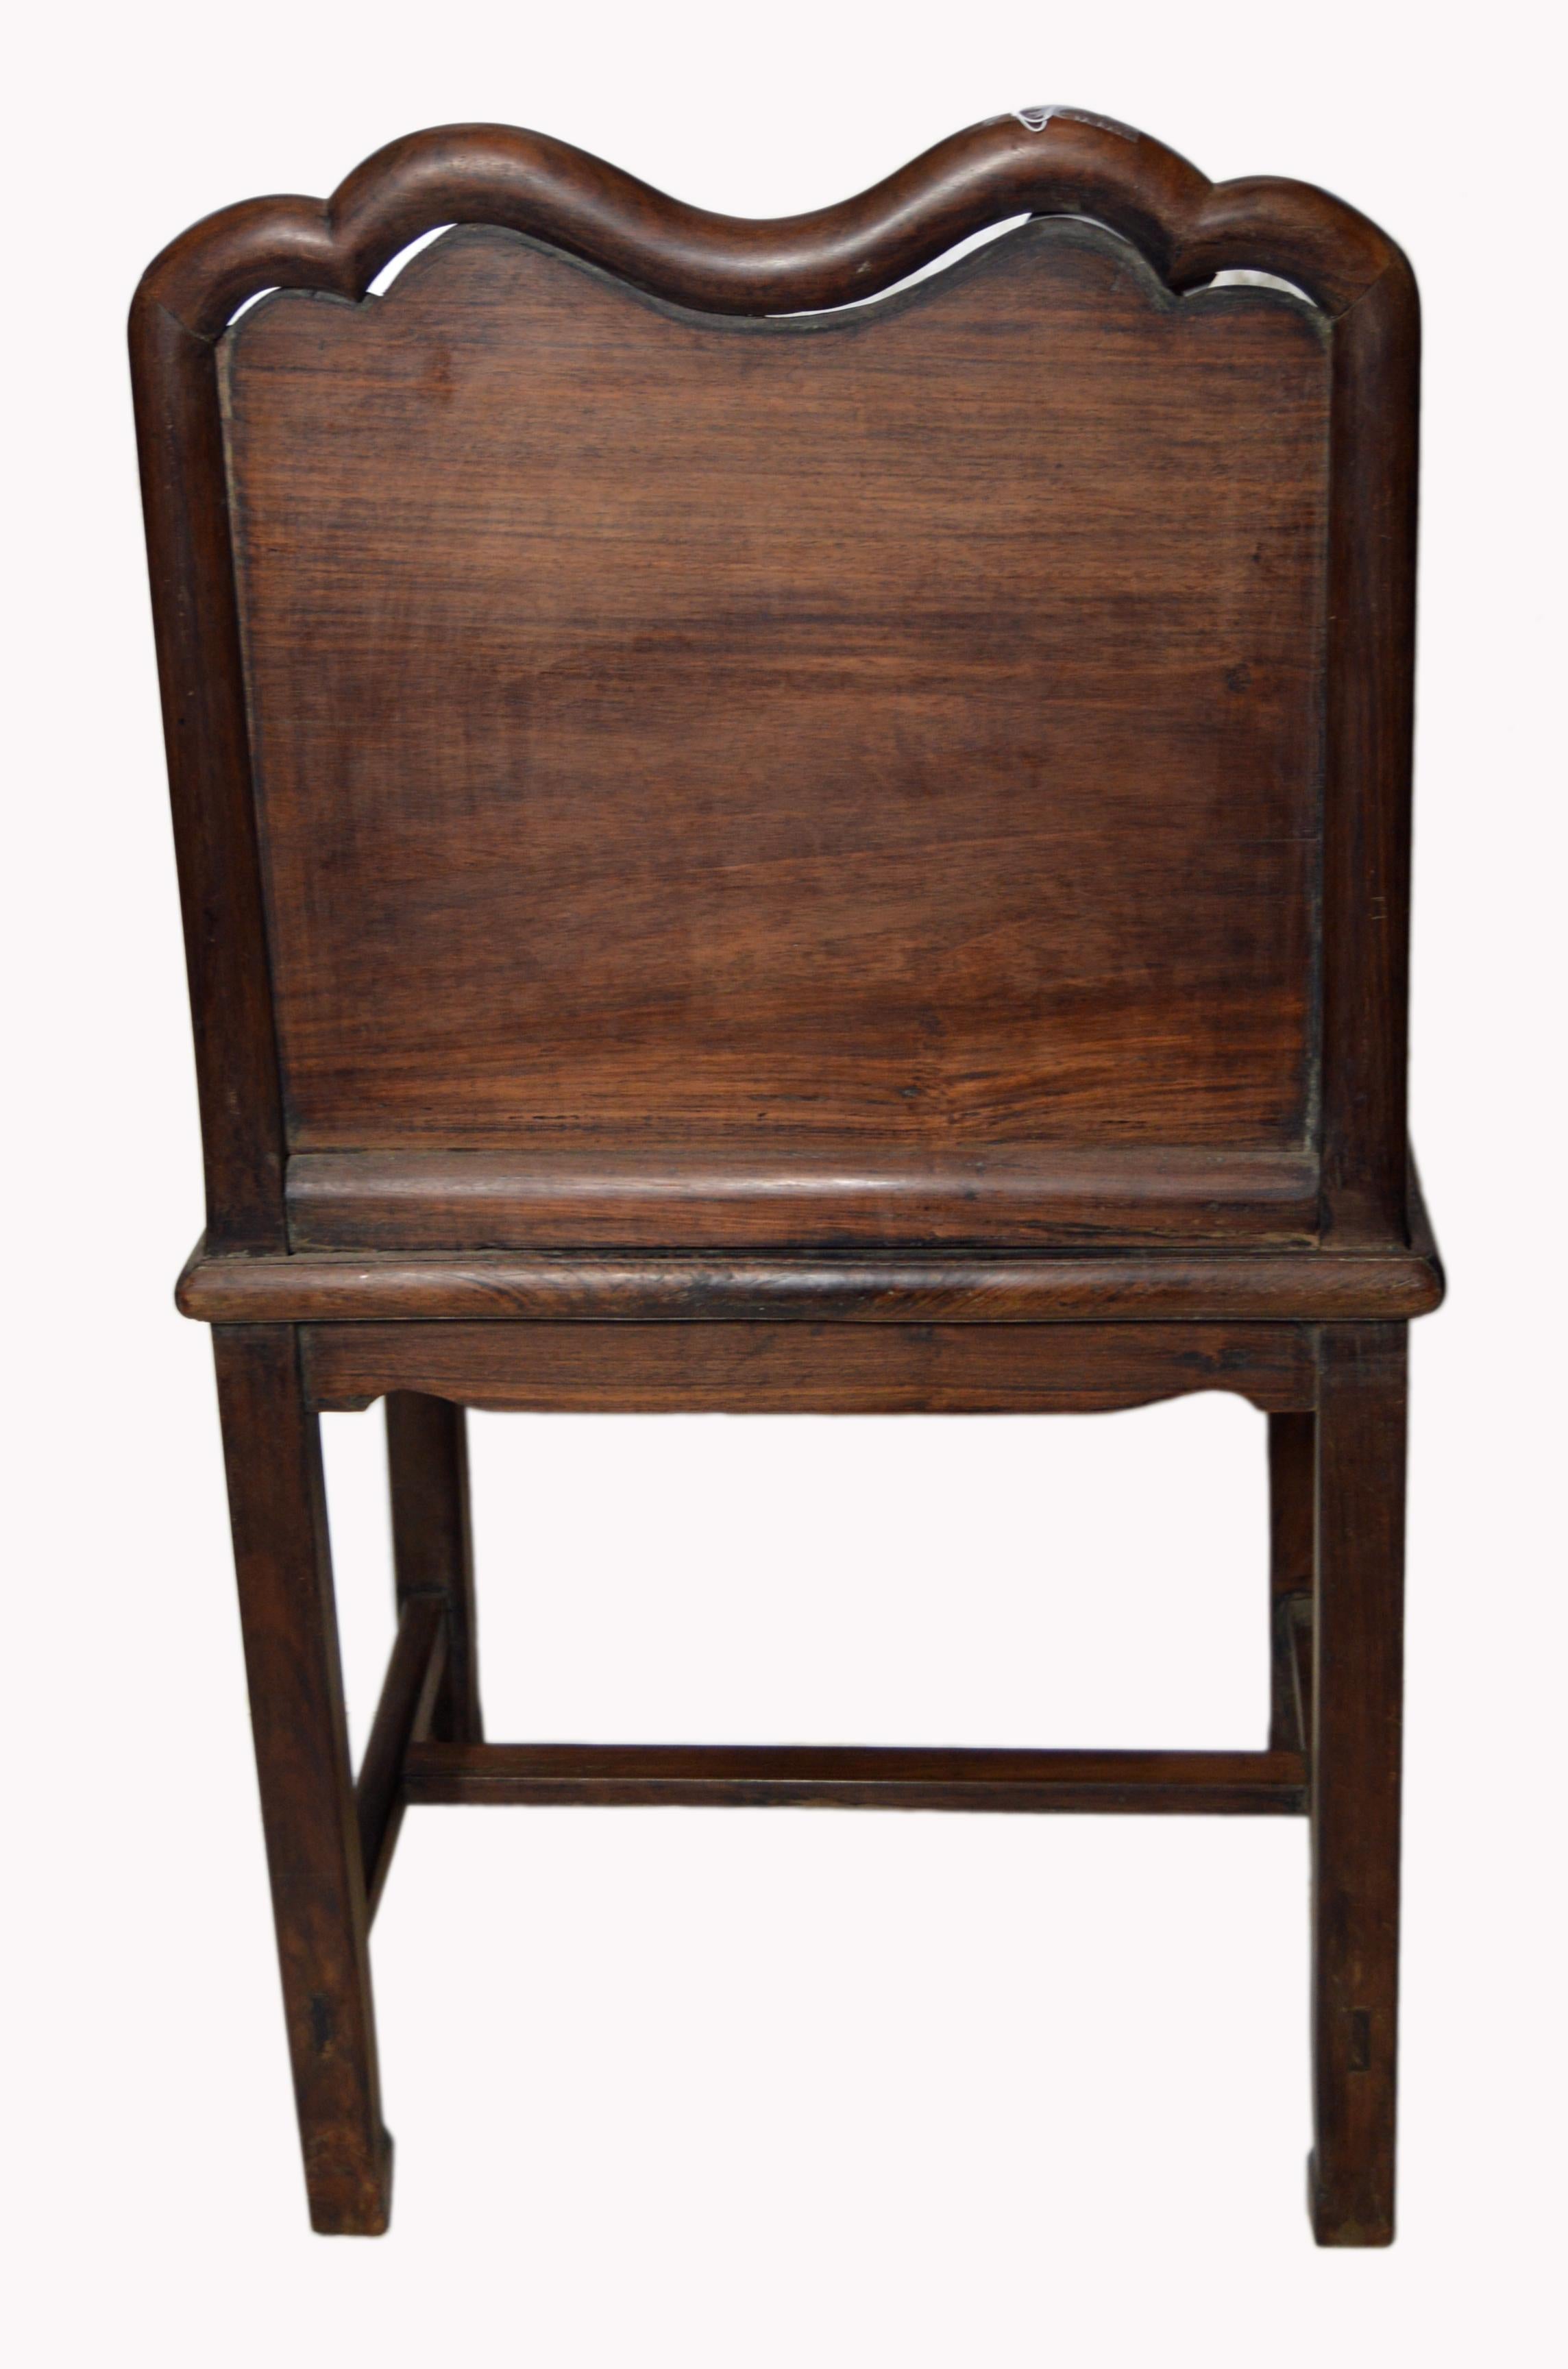 Yumu Chinese 19th Century Side Chair with Dark Lacquered Finish and Cartouche For Sale 2